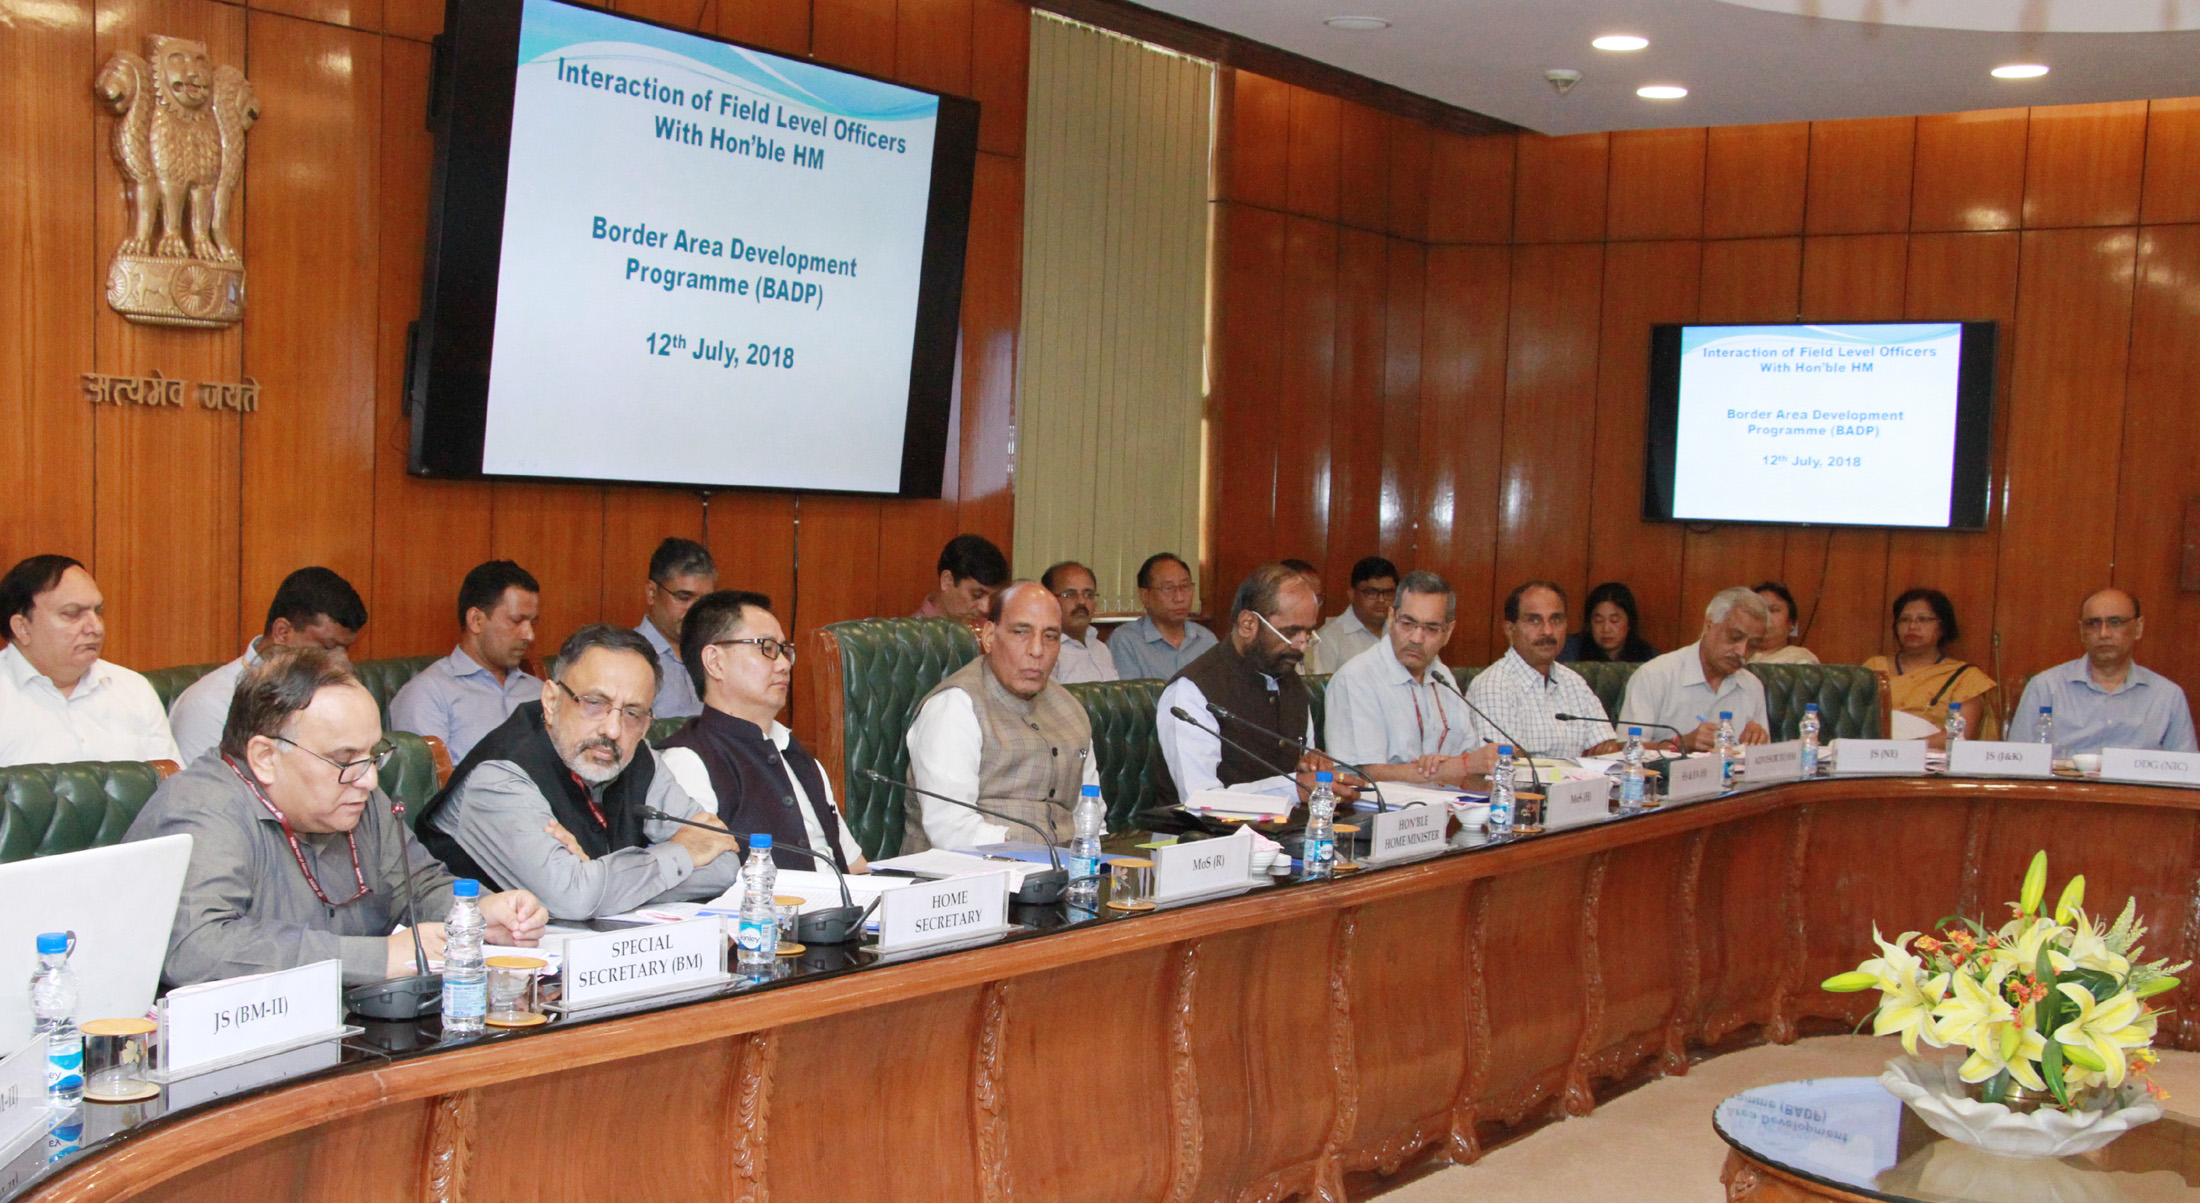 The Union Home Minister, Shri Rajnath Singh chairing an Interaction with the Field Level Officers to review the Border Area Development Programme (BADP), in New Delhi on July 12, 2018. The Ministers of State for Home Affairs, Shri Hansraj Gangaram Ahir and Shri Kiren Rijiju and the Union Home Secretary, Shri Rajiv Gauba and senior officers are also seen.